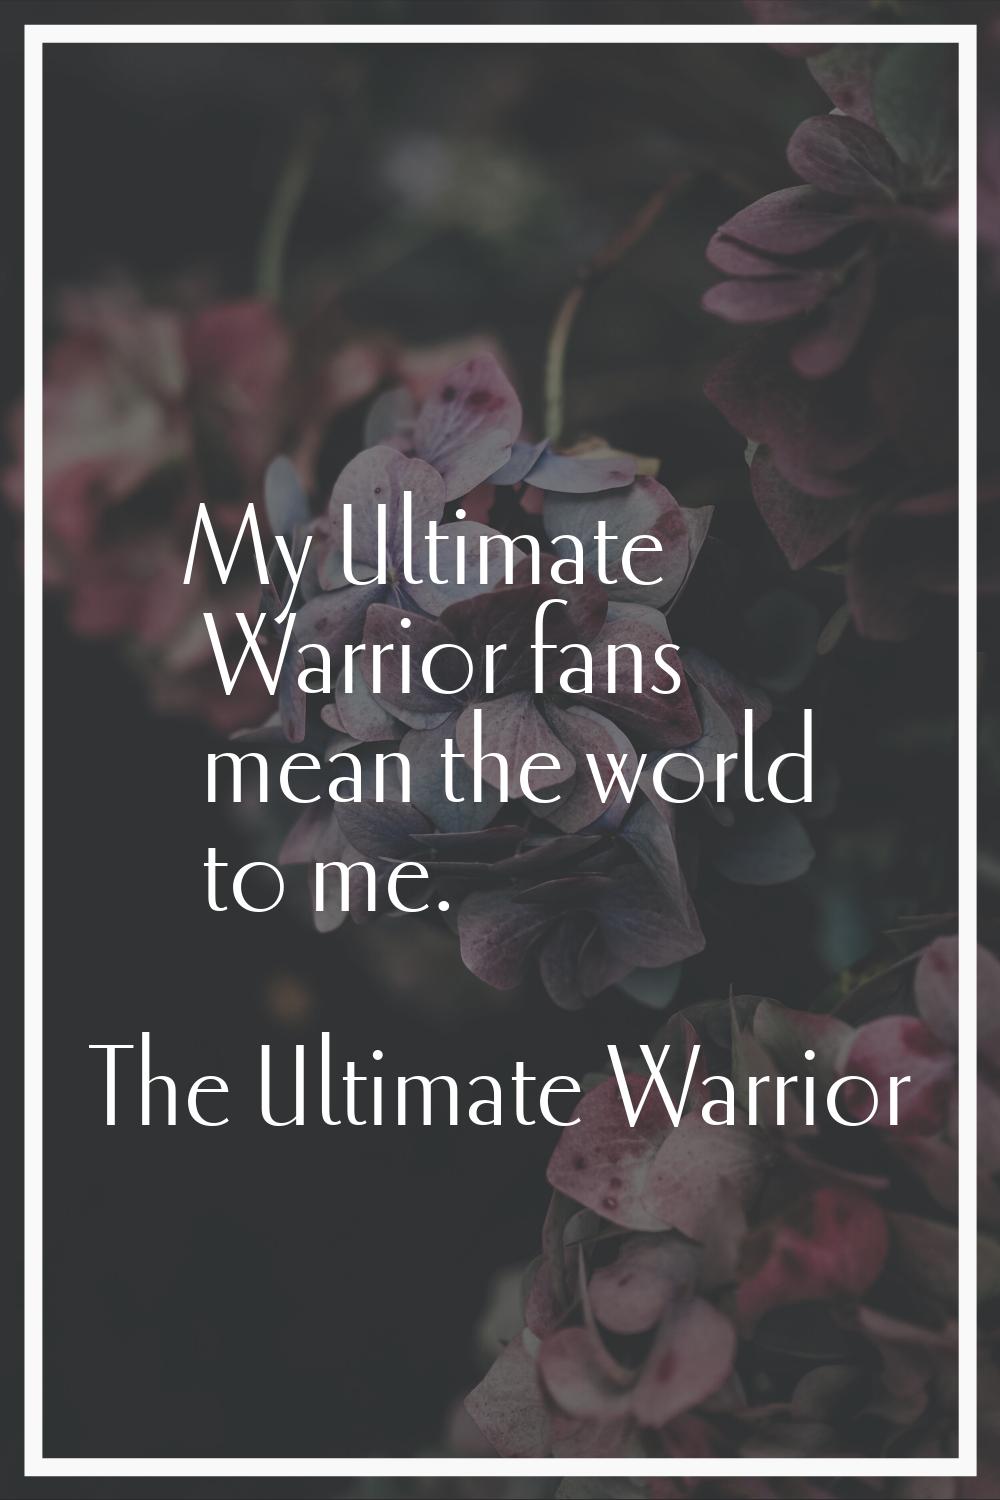 My Ultimate Warrior fans mean the world to me.